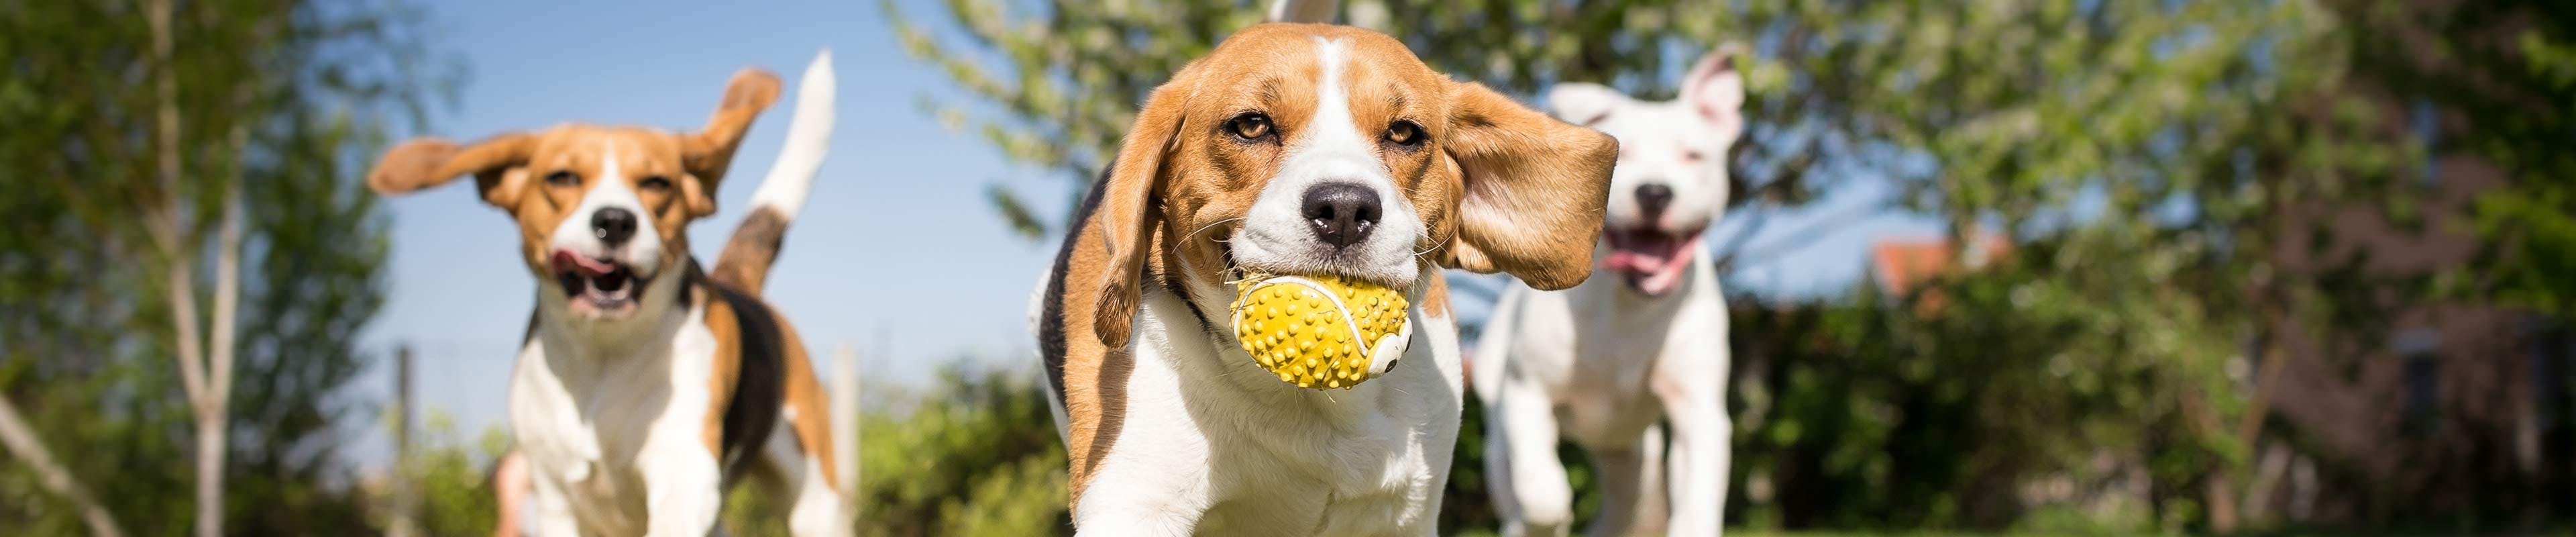 Two beagles and a white pitbull play with a ball on a bright, sunny day.